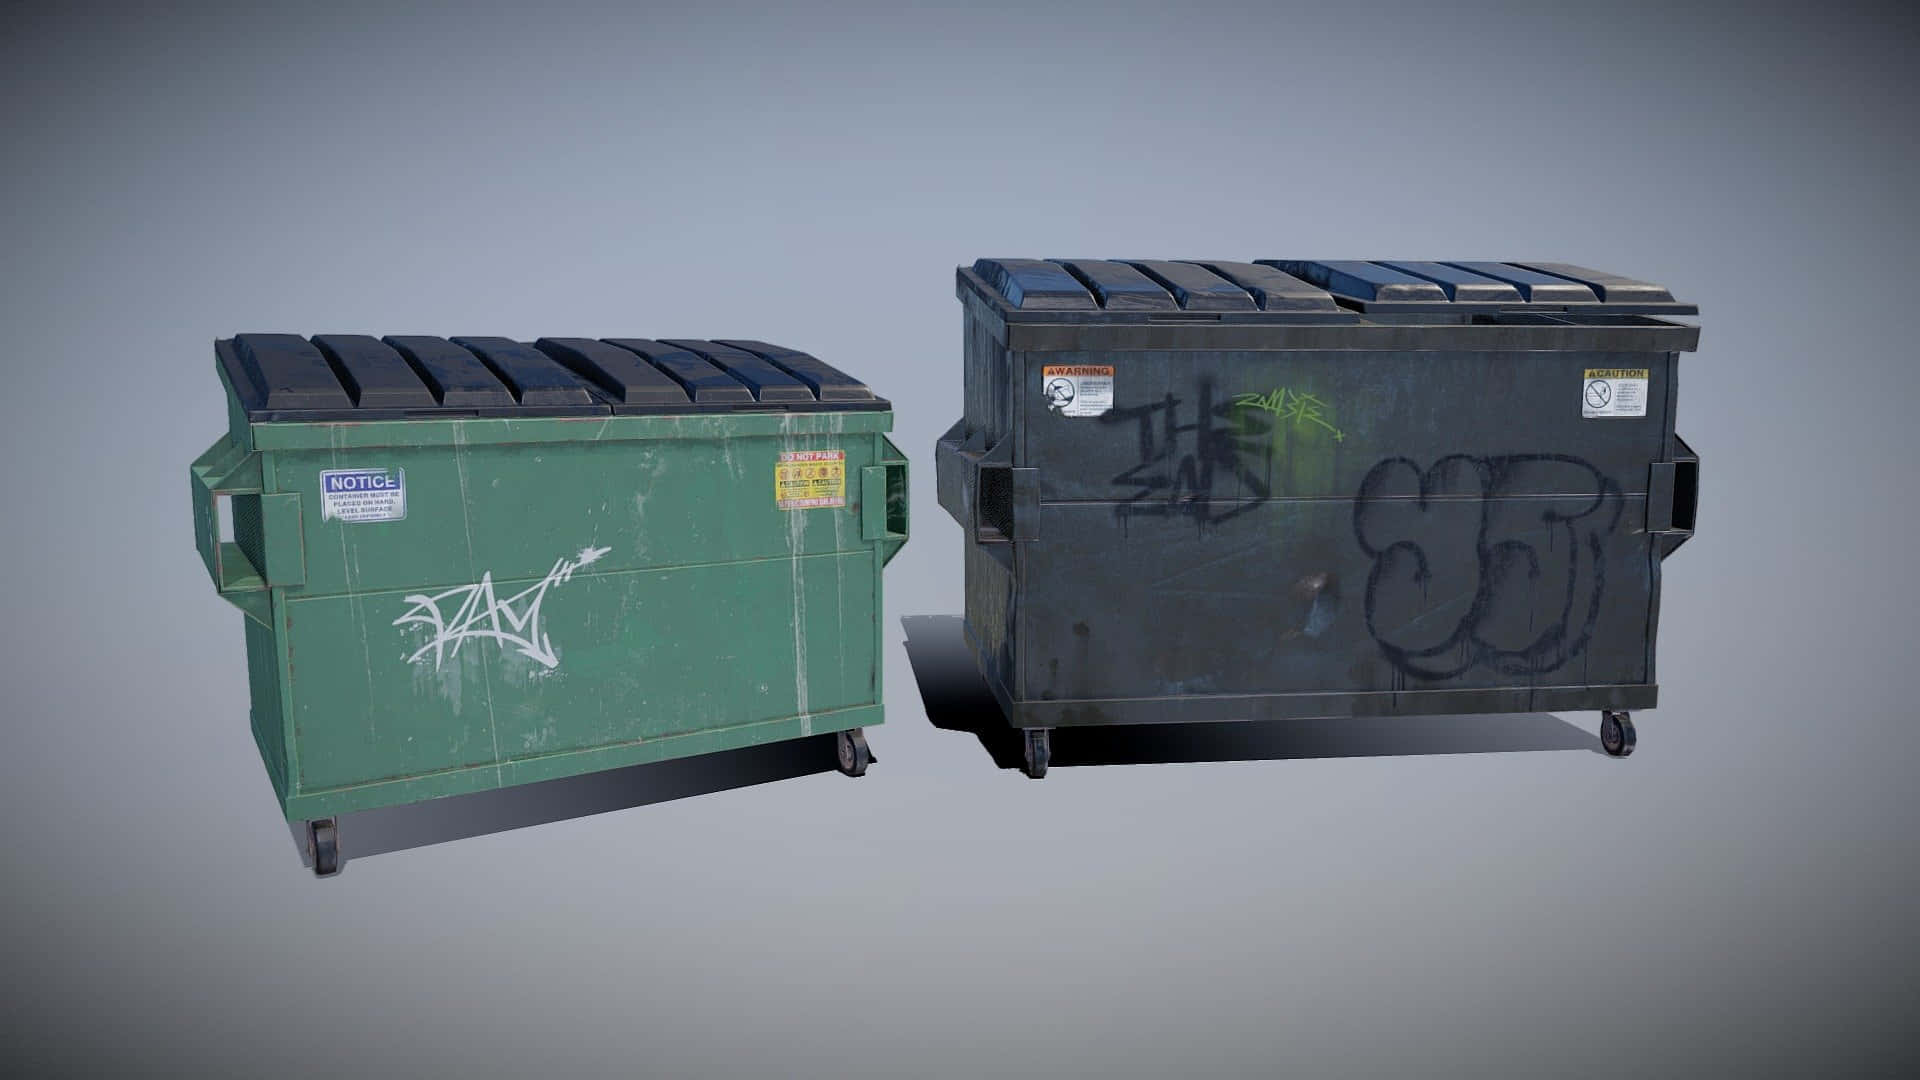 Two Trash Cans With Graffiti On Them